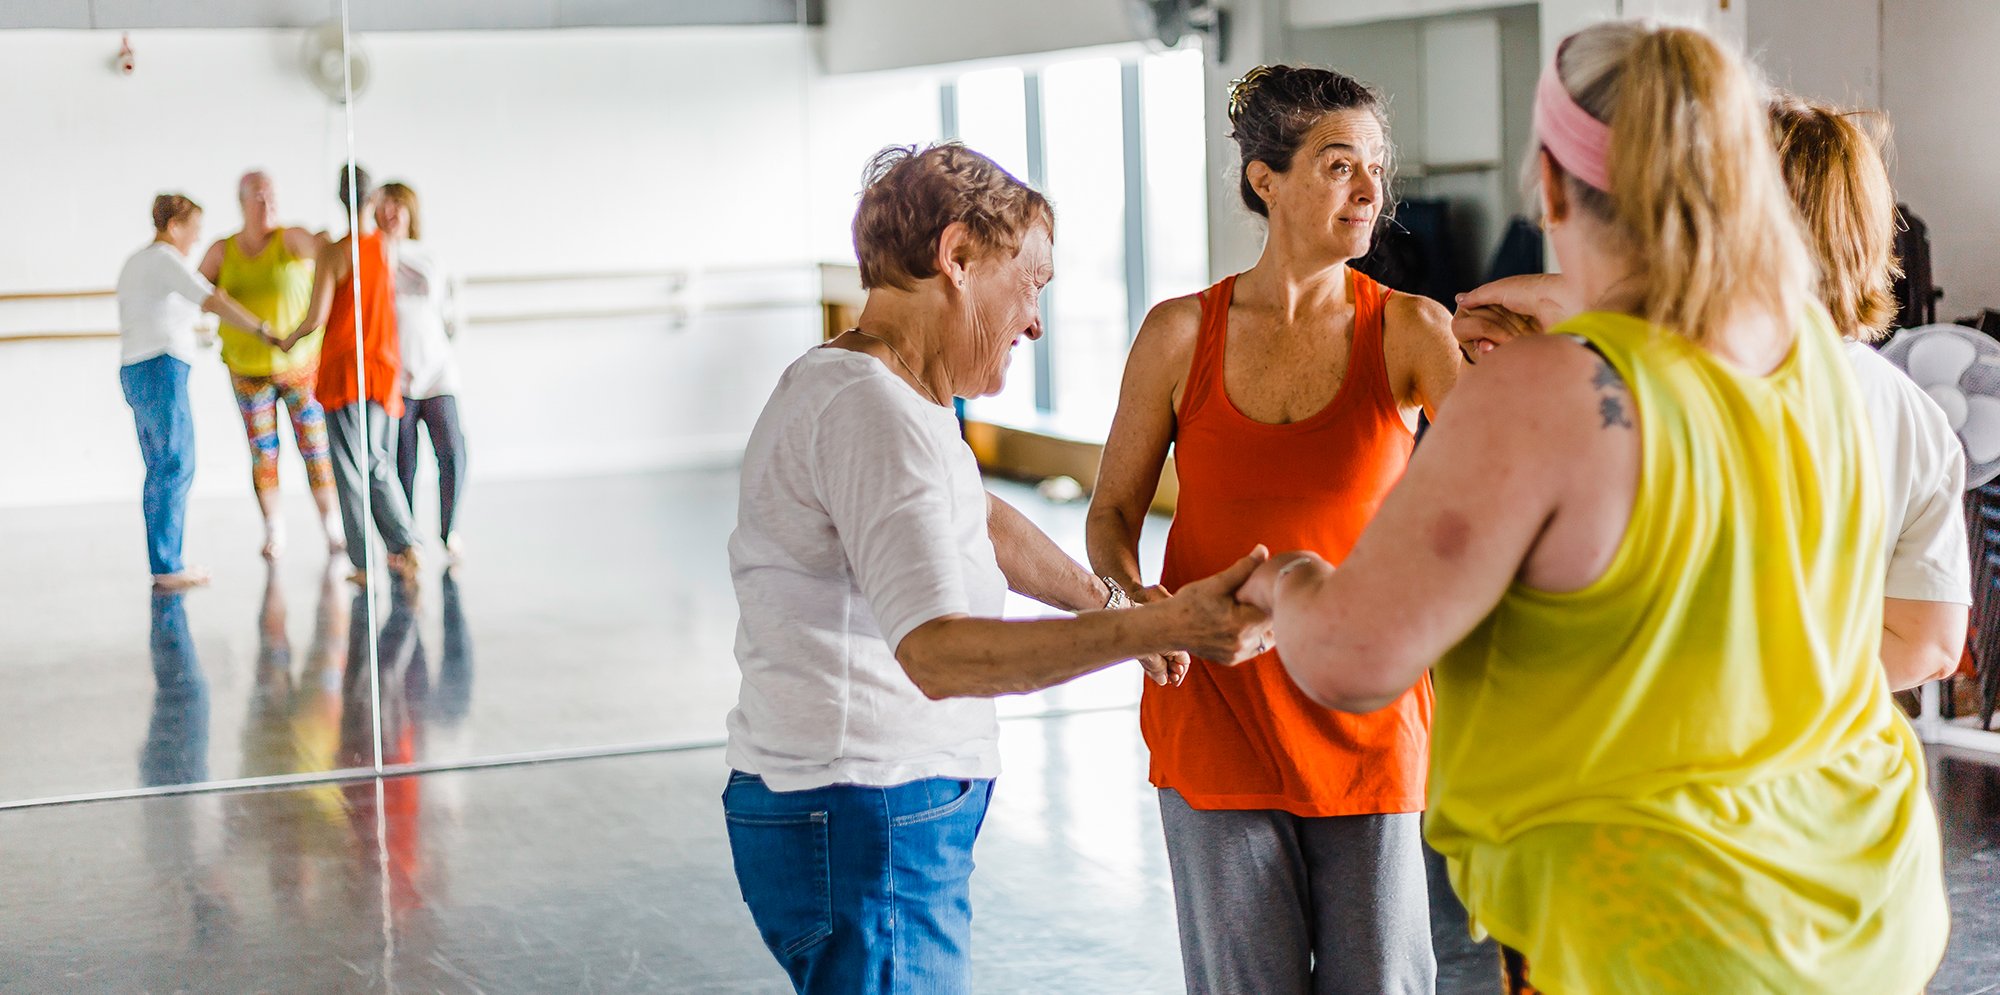 Members of the over 55s dance group warm up in the studio. They are wearing vibrant dance wear: bright yellow and orange tops. We see the group reflected in the large dance studio mirror.